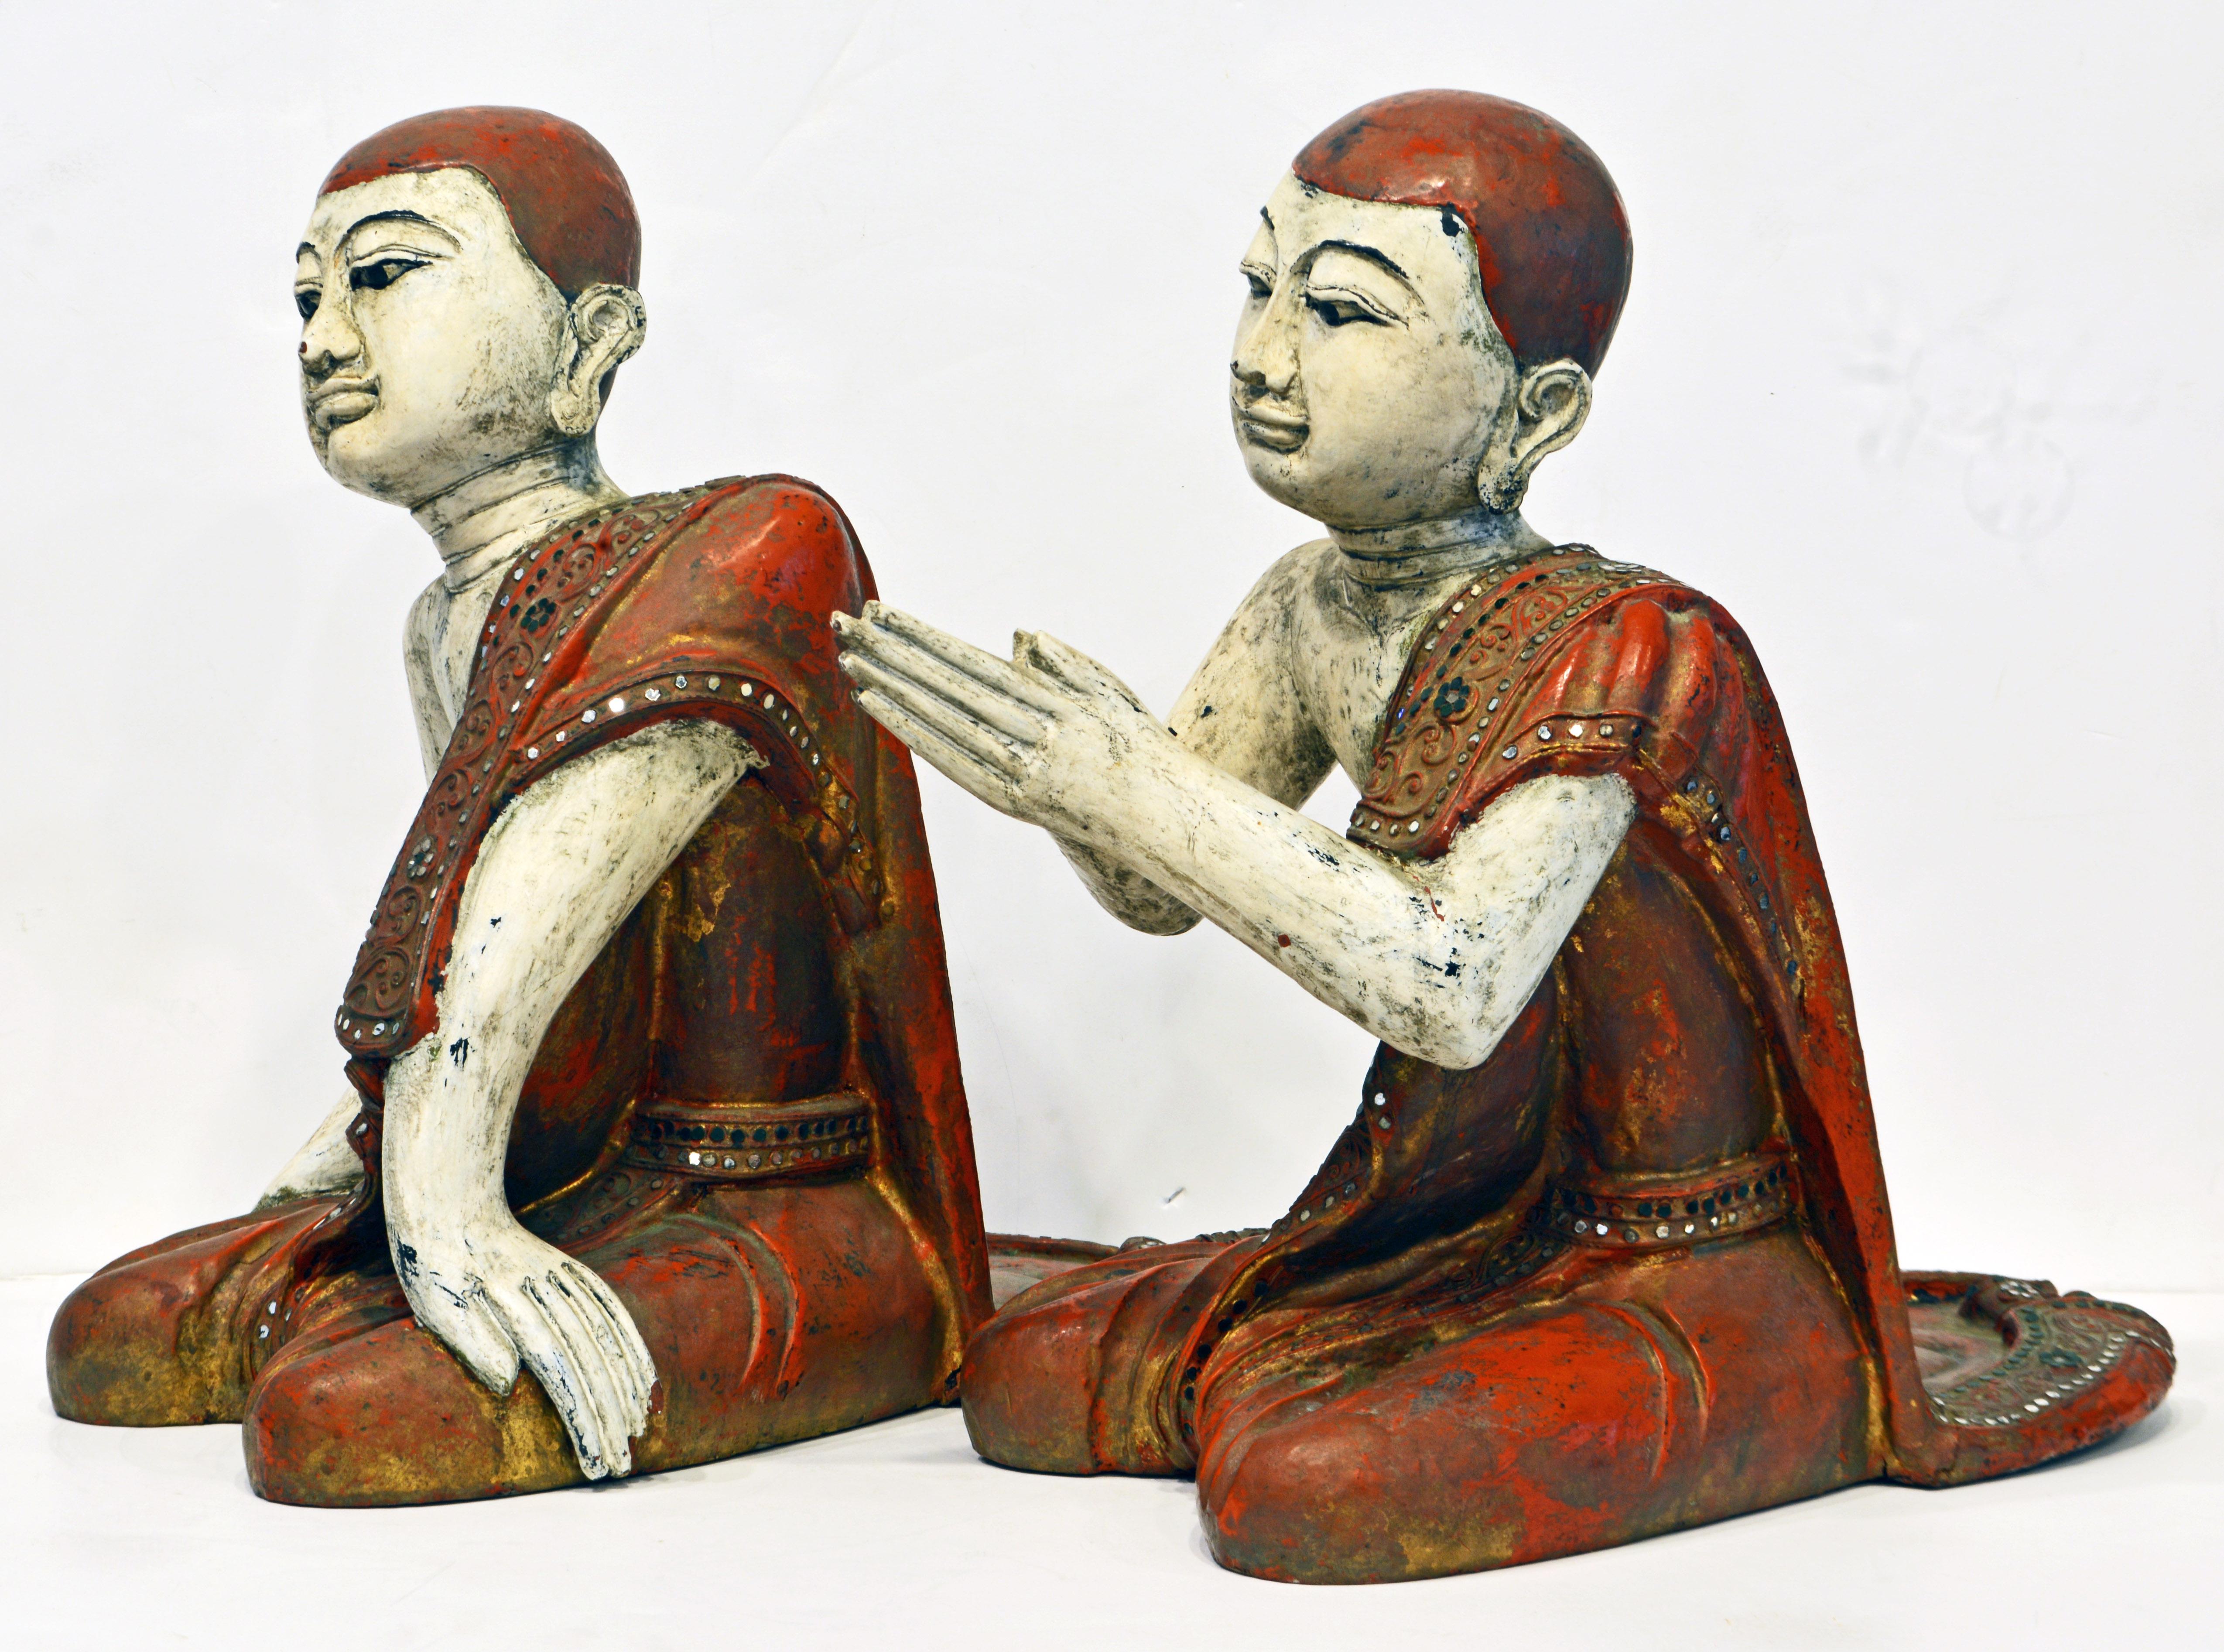 Chinoiserie Two Mid-20 Century Thai or Burmese Carved and Painted Figures of Buddhist Monks